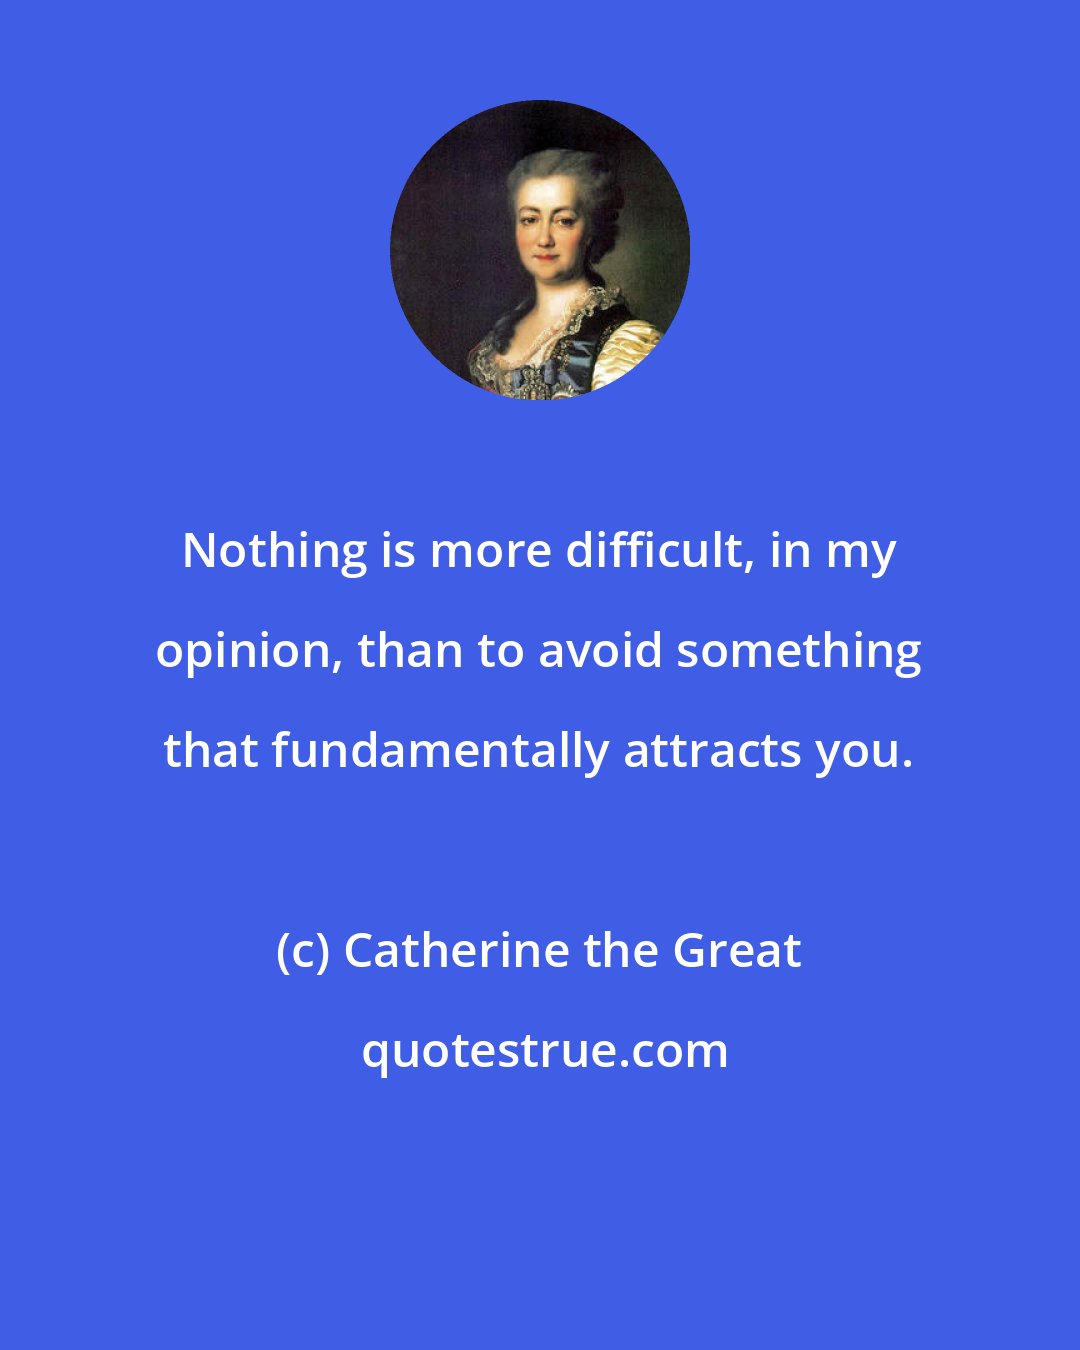 Catherine the Great: Nothing is more difficult, in my opinion, than to avoid something that fundamentally attracts you.